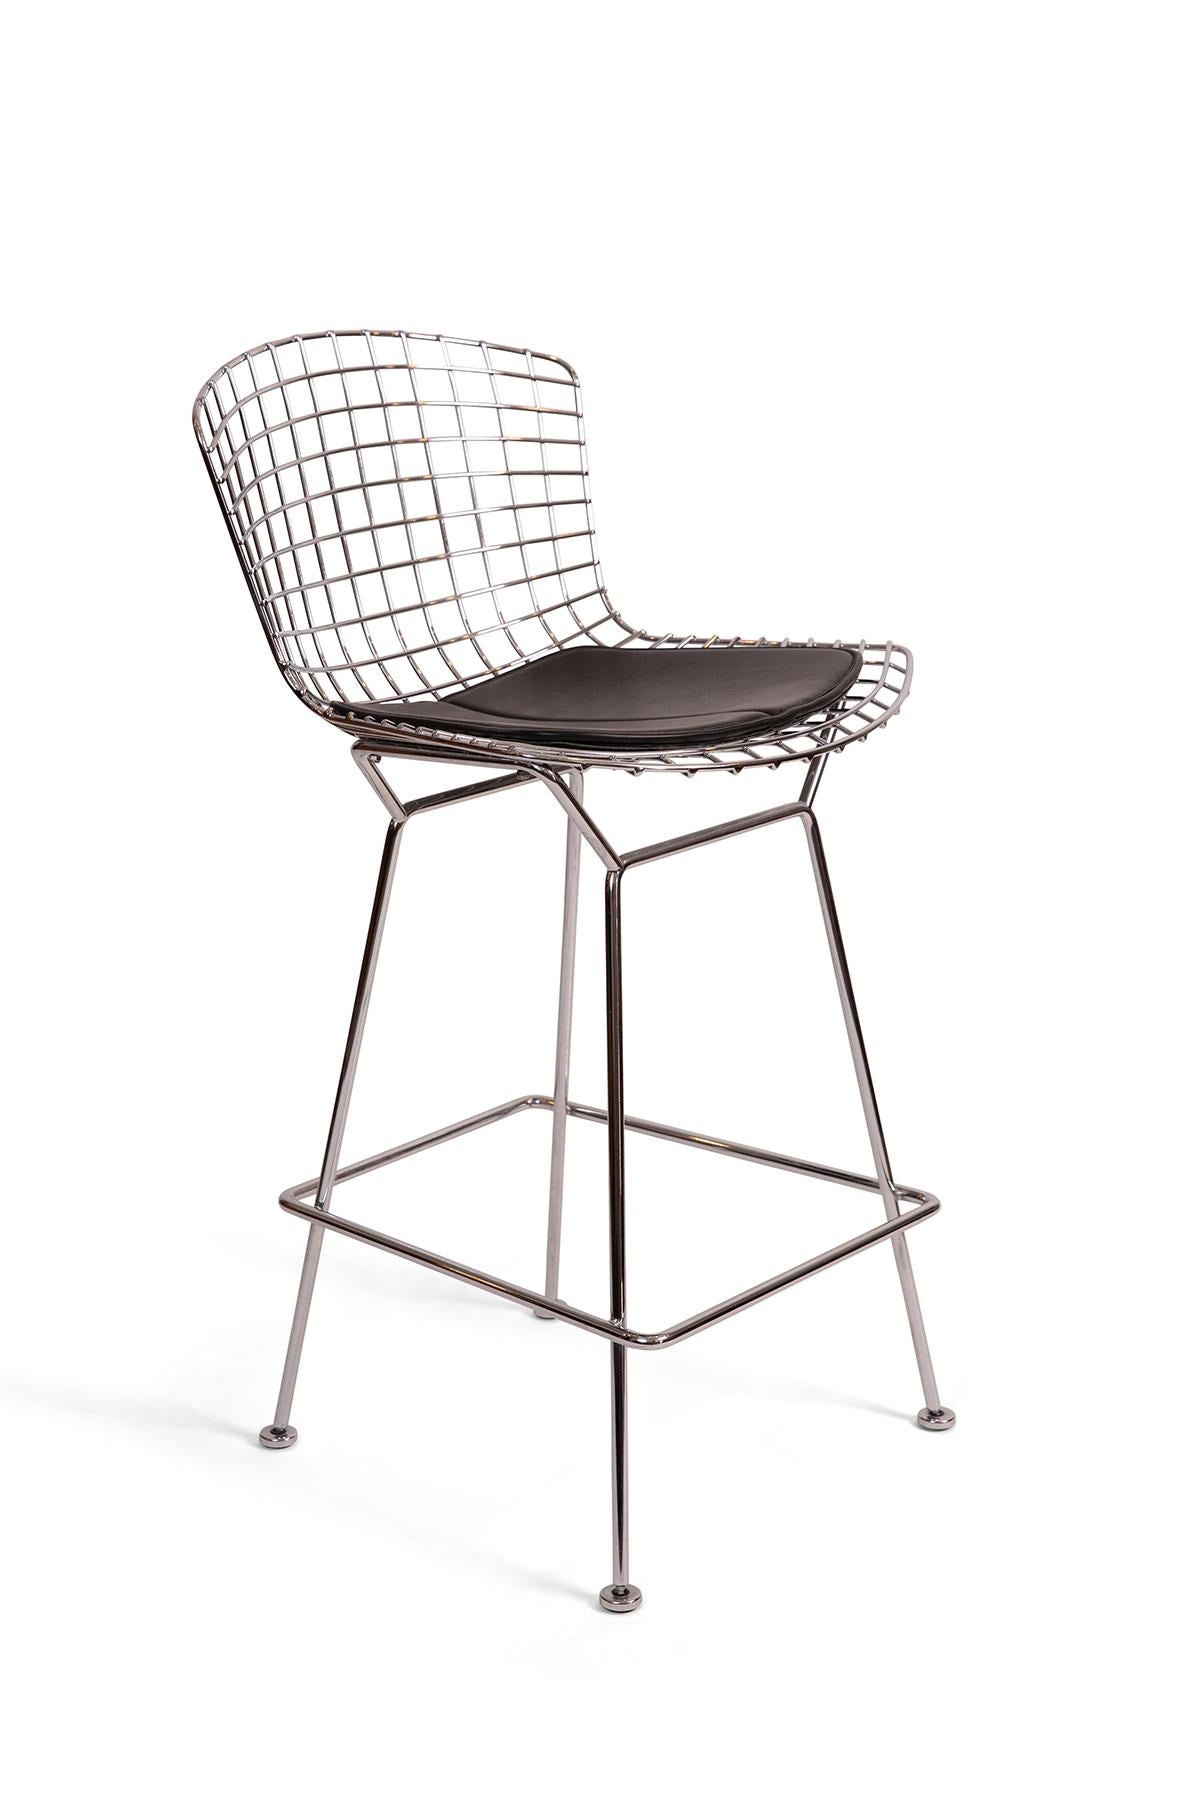 Pair of Harry Bertoia for Knoll chrome barstools. These examples are American made within the past 20 years and are in excellent original condition. Price listed is for the pair with black seat pads.